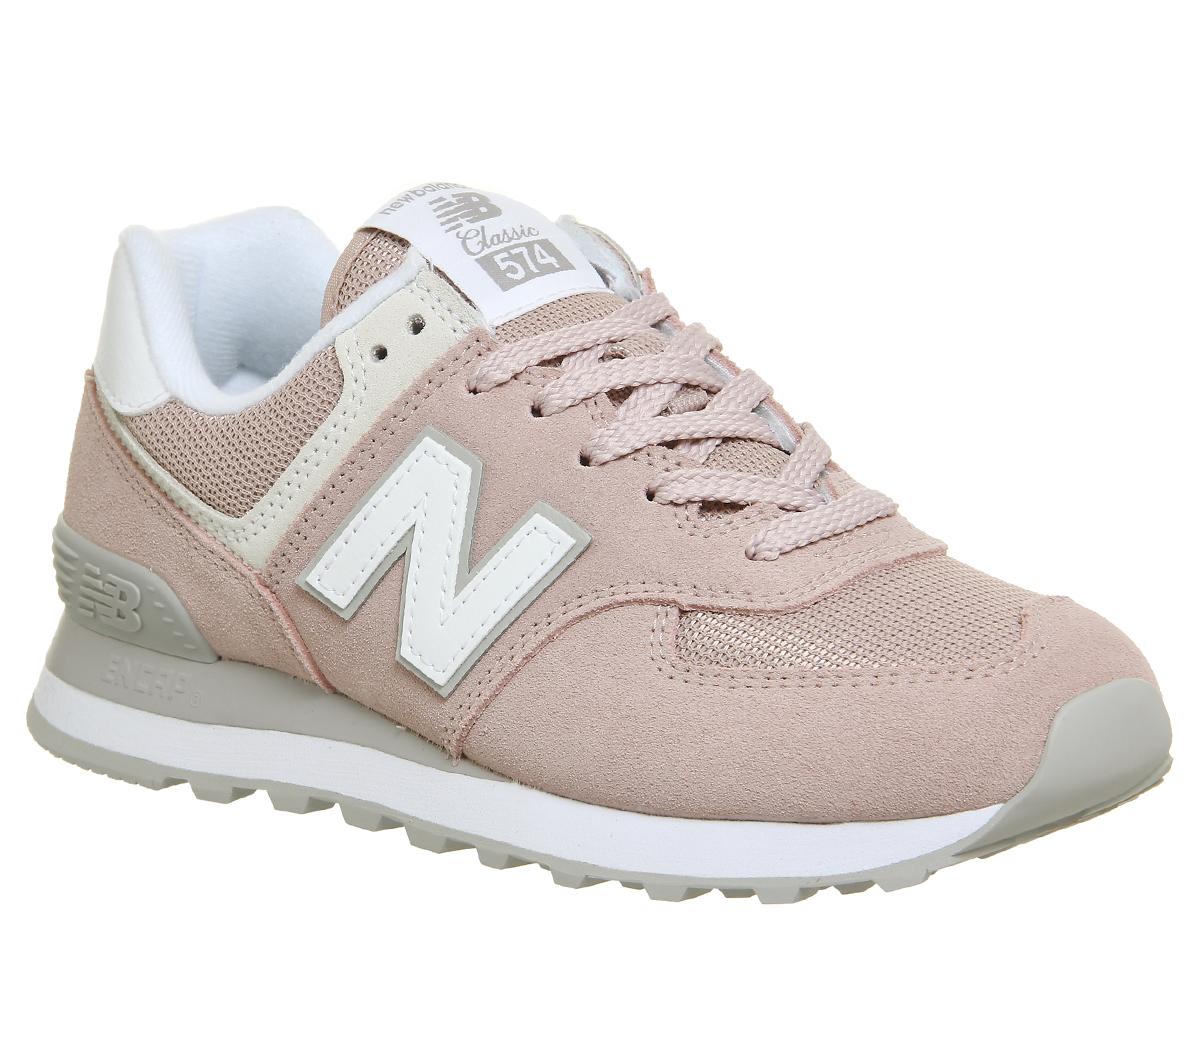 New Balance Wl574 Pink - Hers trainers